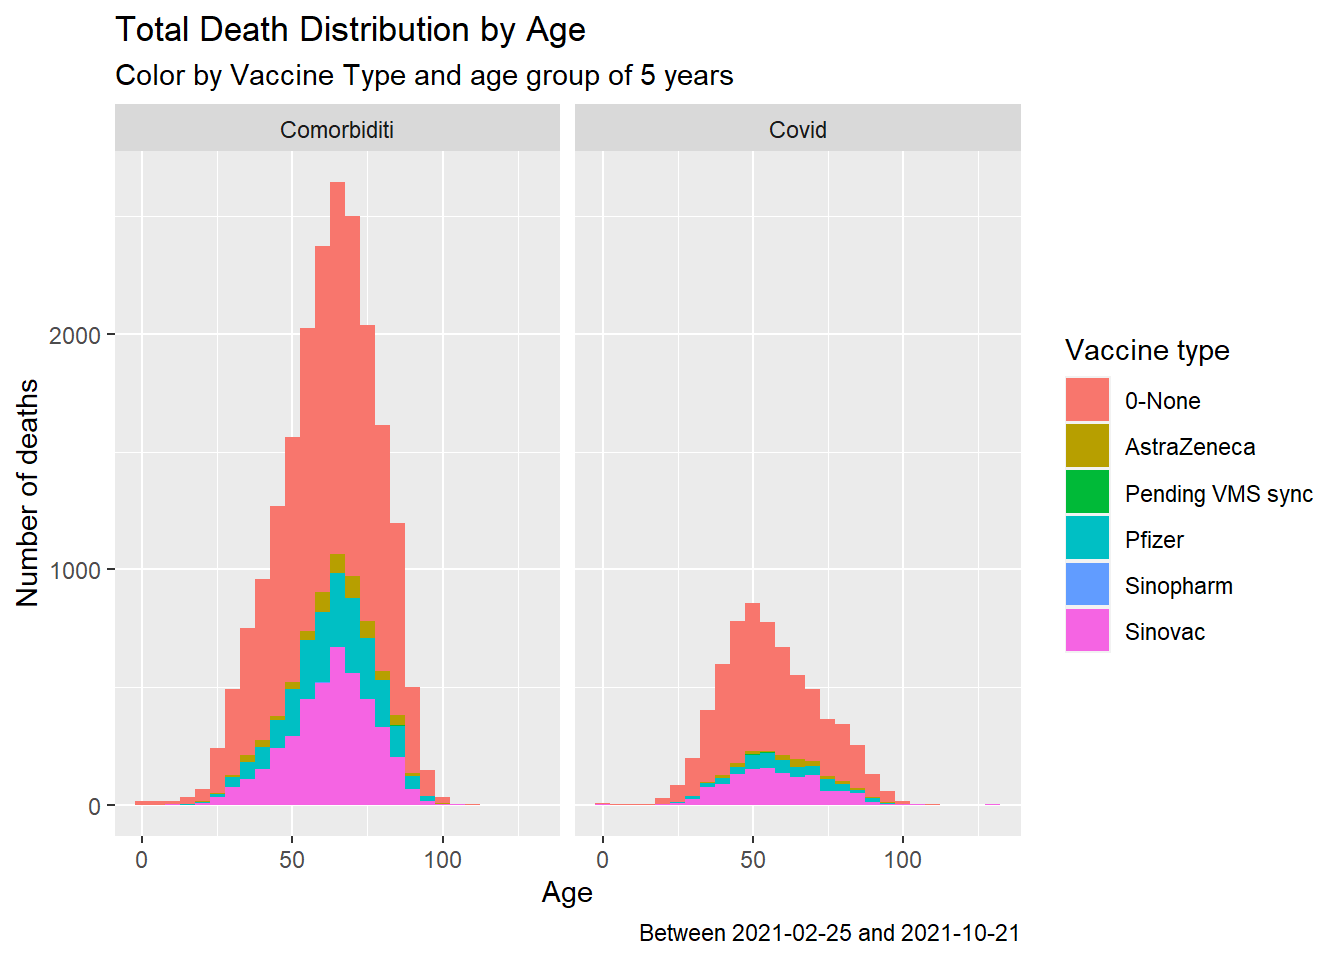 Summary distribution of Covid deaths by age group,  vaccine type and cause